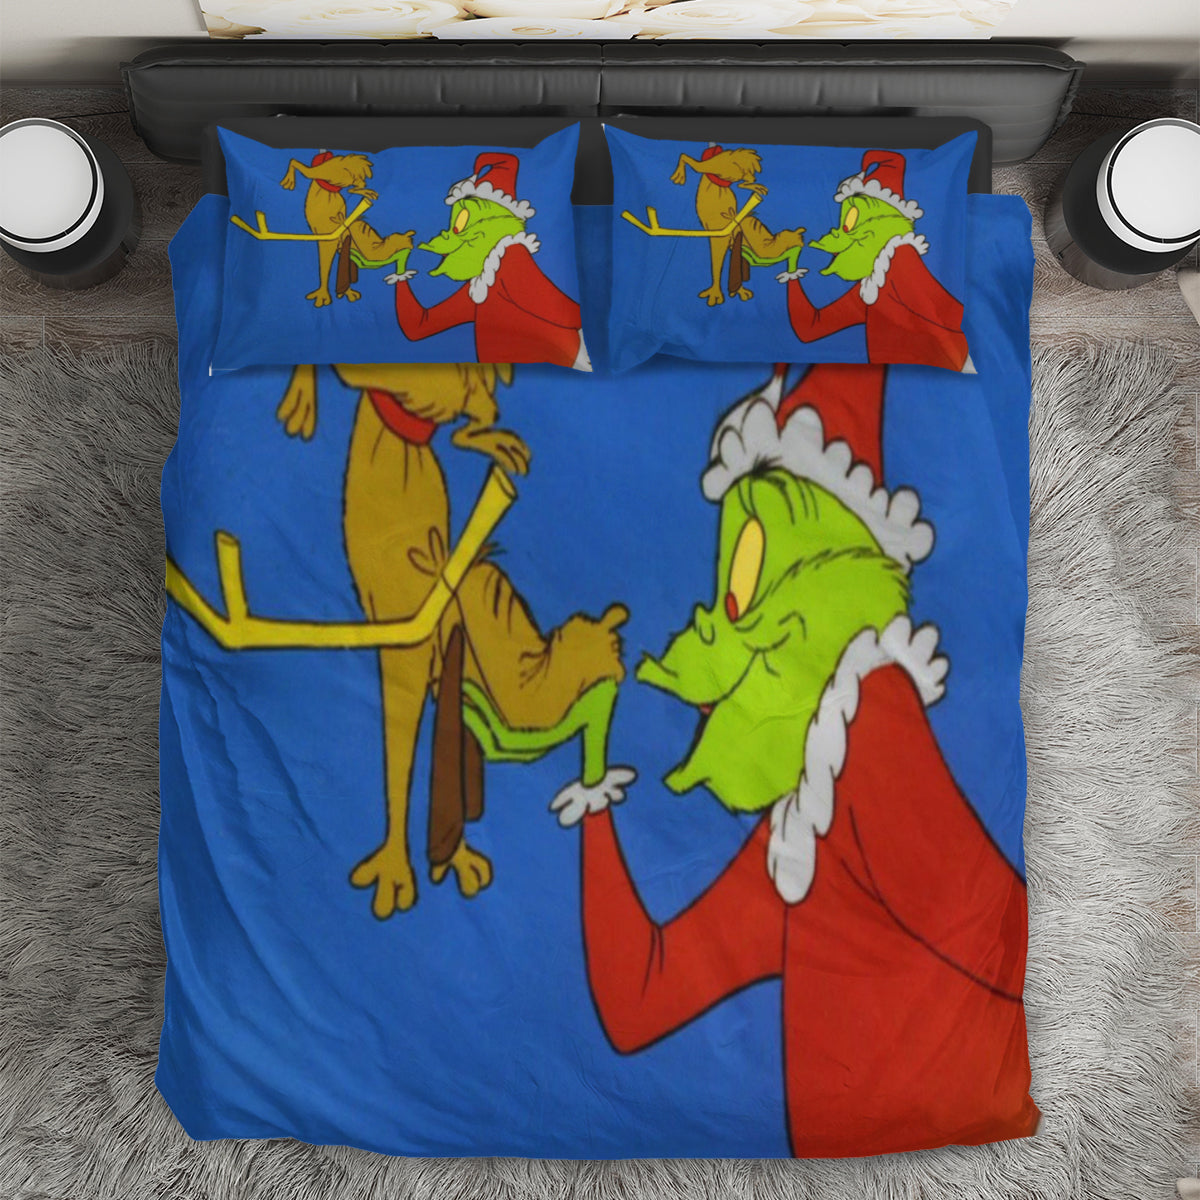 The Grinch Christmas Grinch Max 9 3PCS Bedding Set Duvet Cover And Pillow Cases Gift For Fan